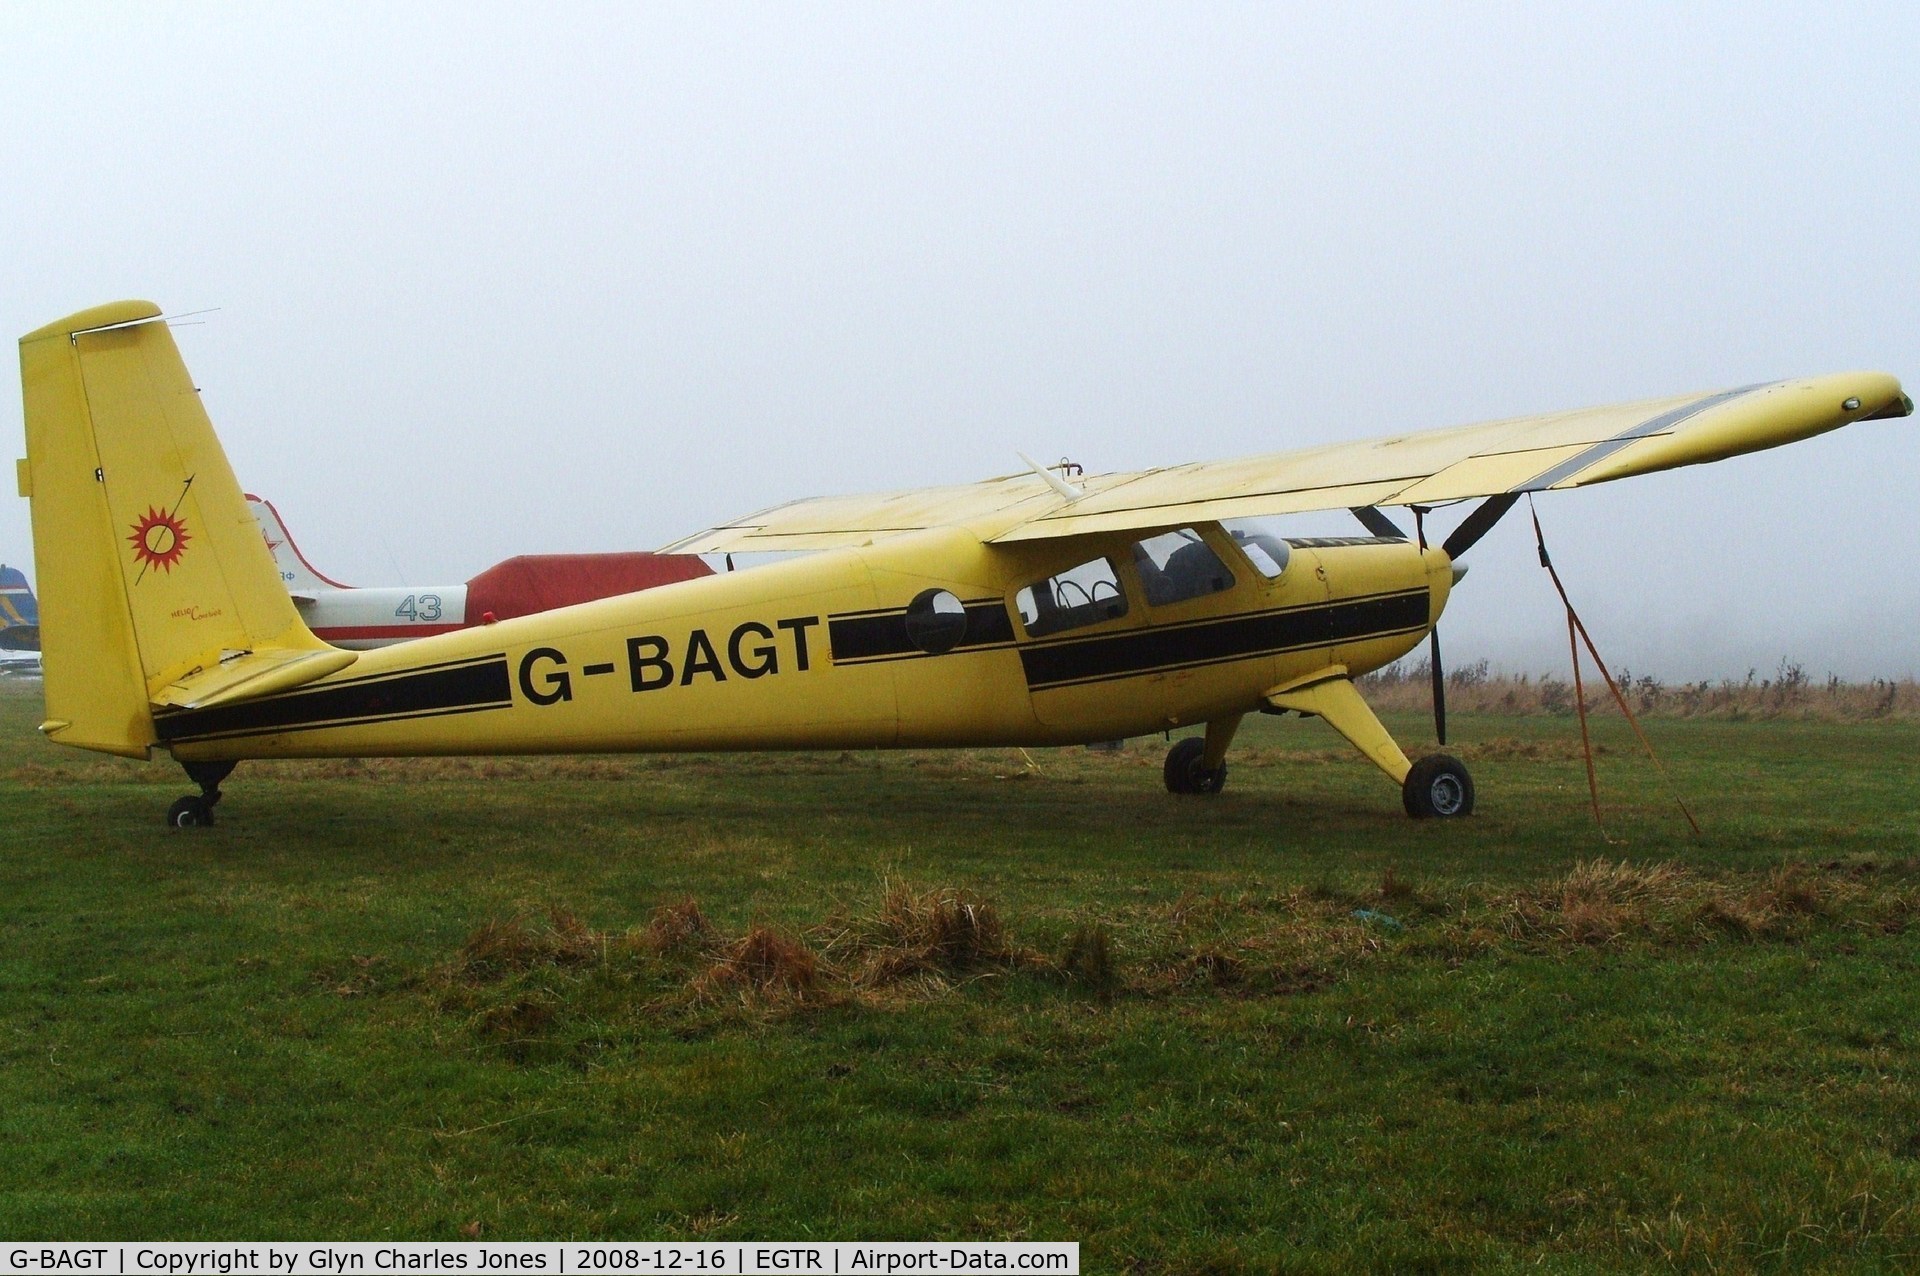 G-BAGT, 1968 Helio H-295-1200 Super Courier C/N 1288, Taken on a quiet cold and foggy day. With thanks to Elstree control tower who granted me authority to take photographs on the aerodrome. Previously CR-LJG.